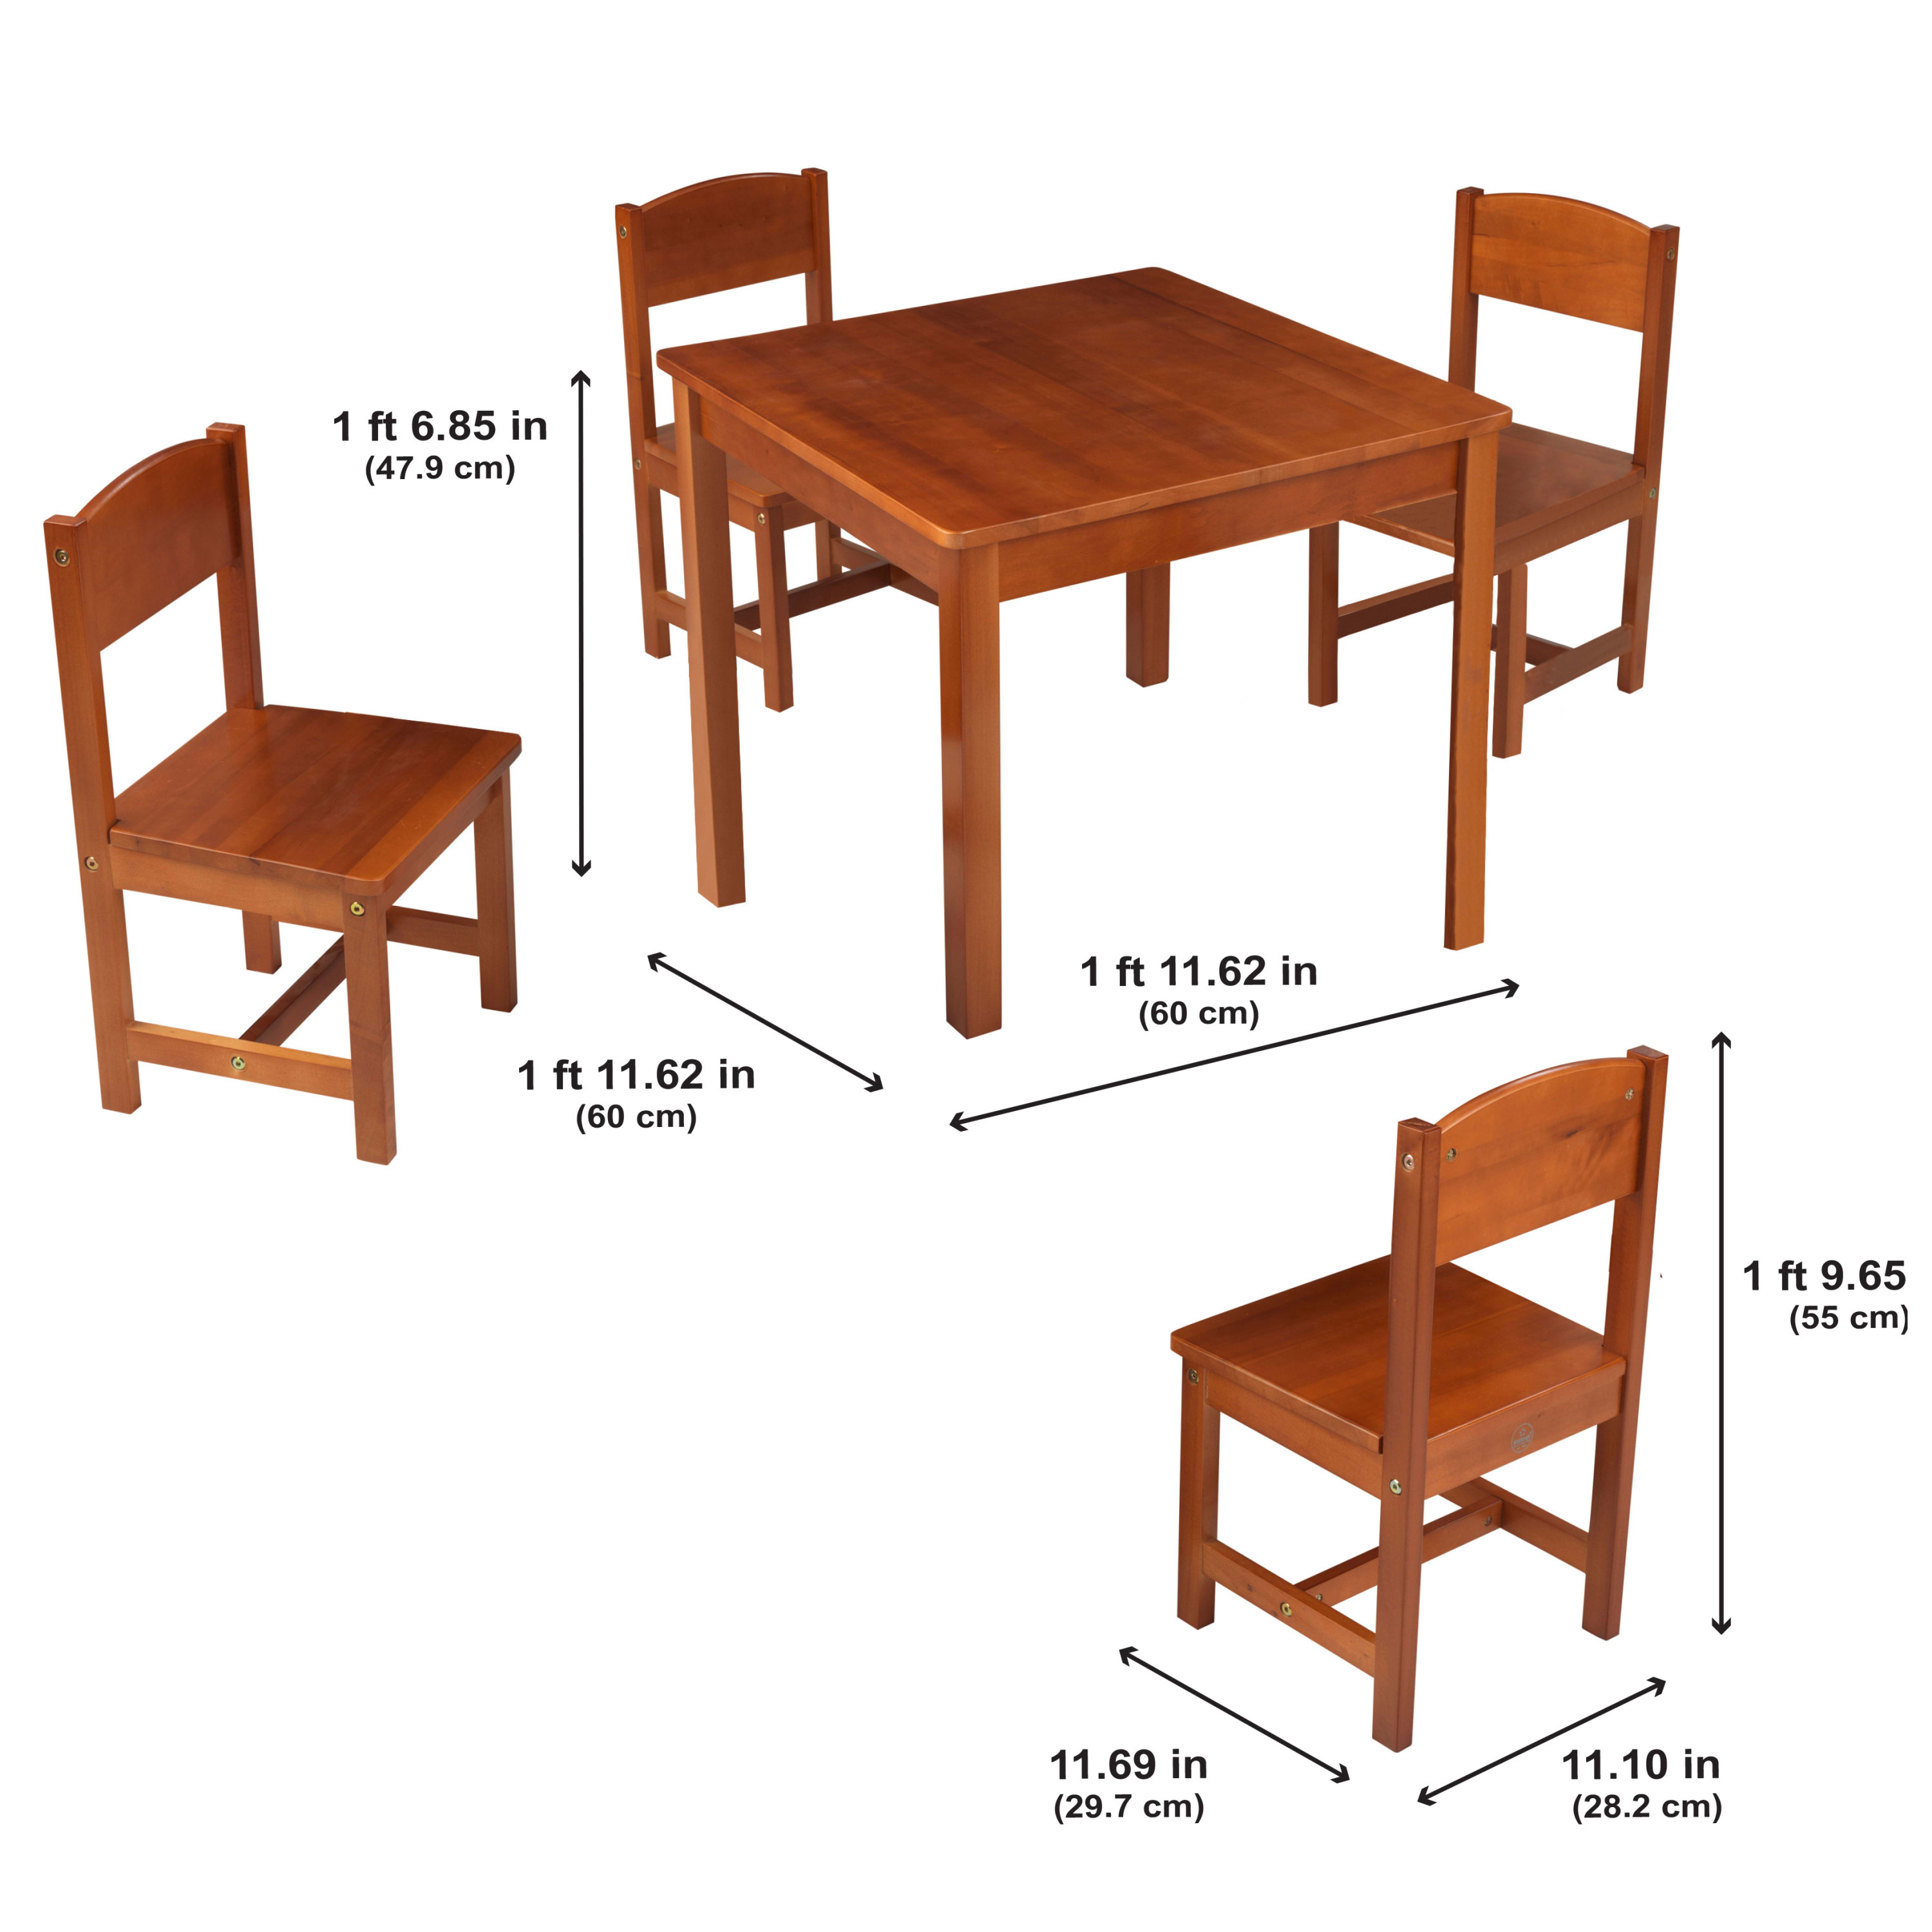 KidKraft KidKraft Wooden Farmhouse Table & 4 Chairs Set, Children's Furniture for Arts and Activity – Pecan - image 4 of 6